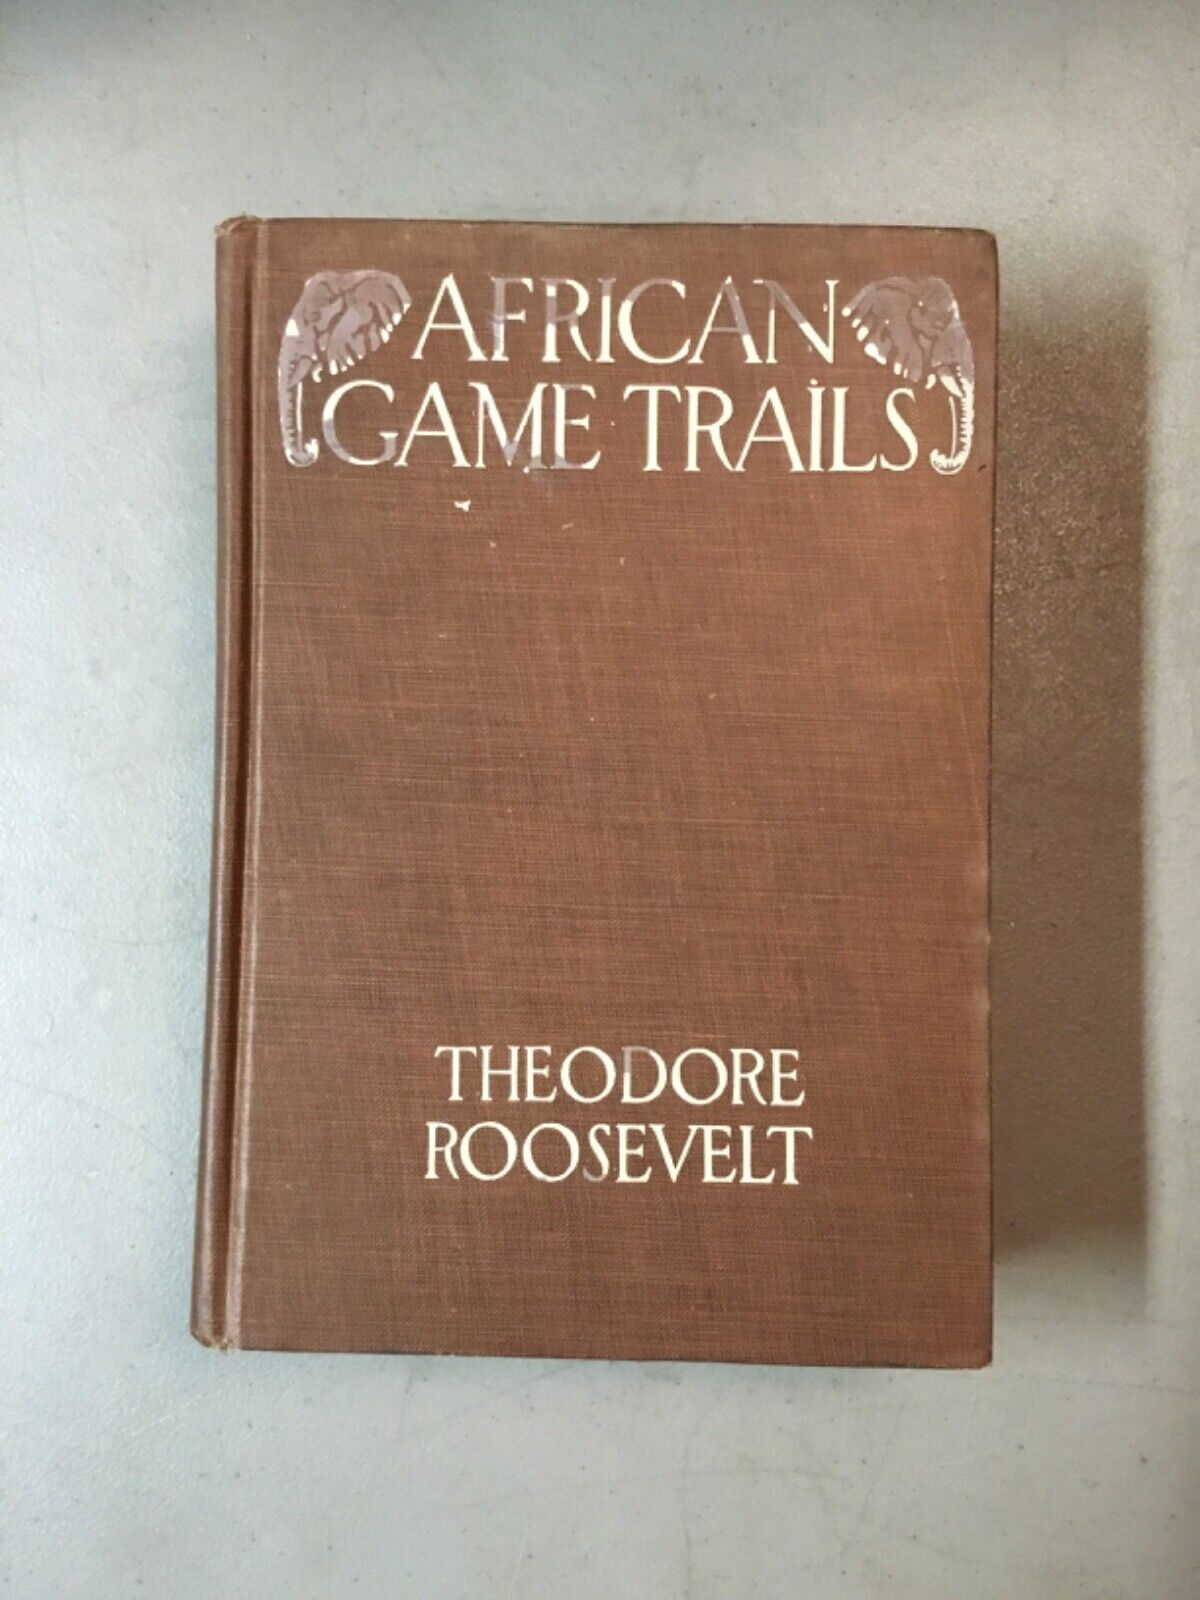 African Game Trails, Theodore Roosevelt, 1ST TRADE ED 1910 Scribner’s, ILLUS